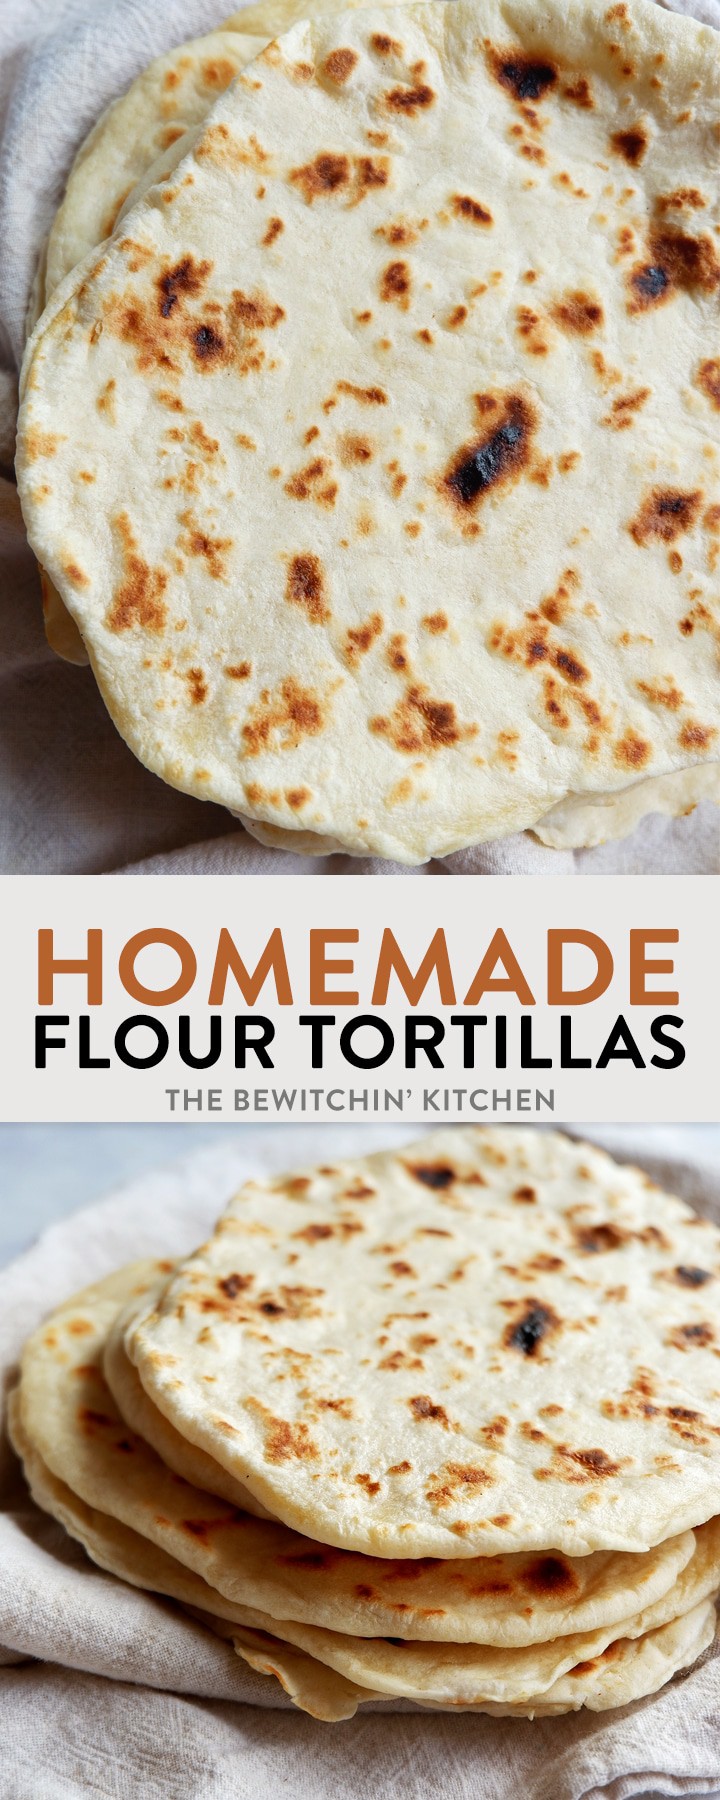 How to Make Flour Tortillas | The Bewitchin' Kitchen